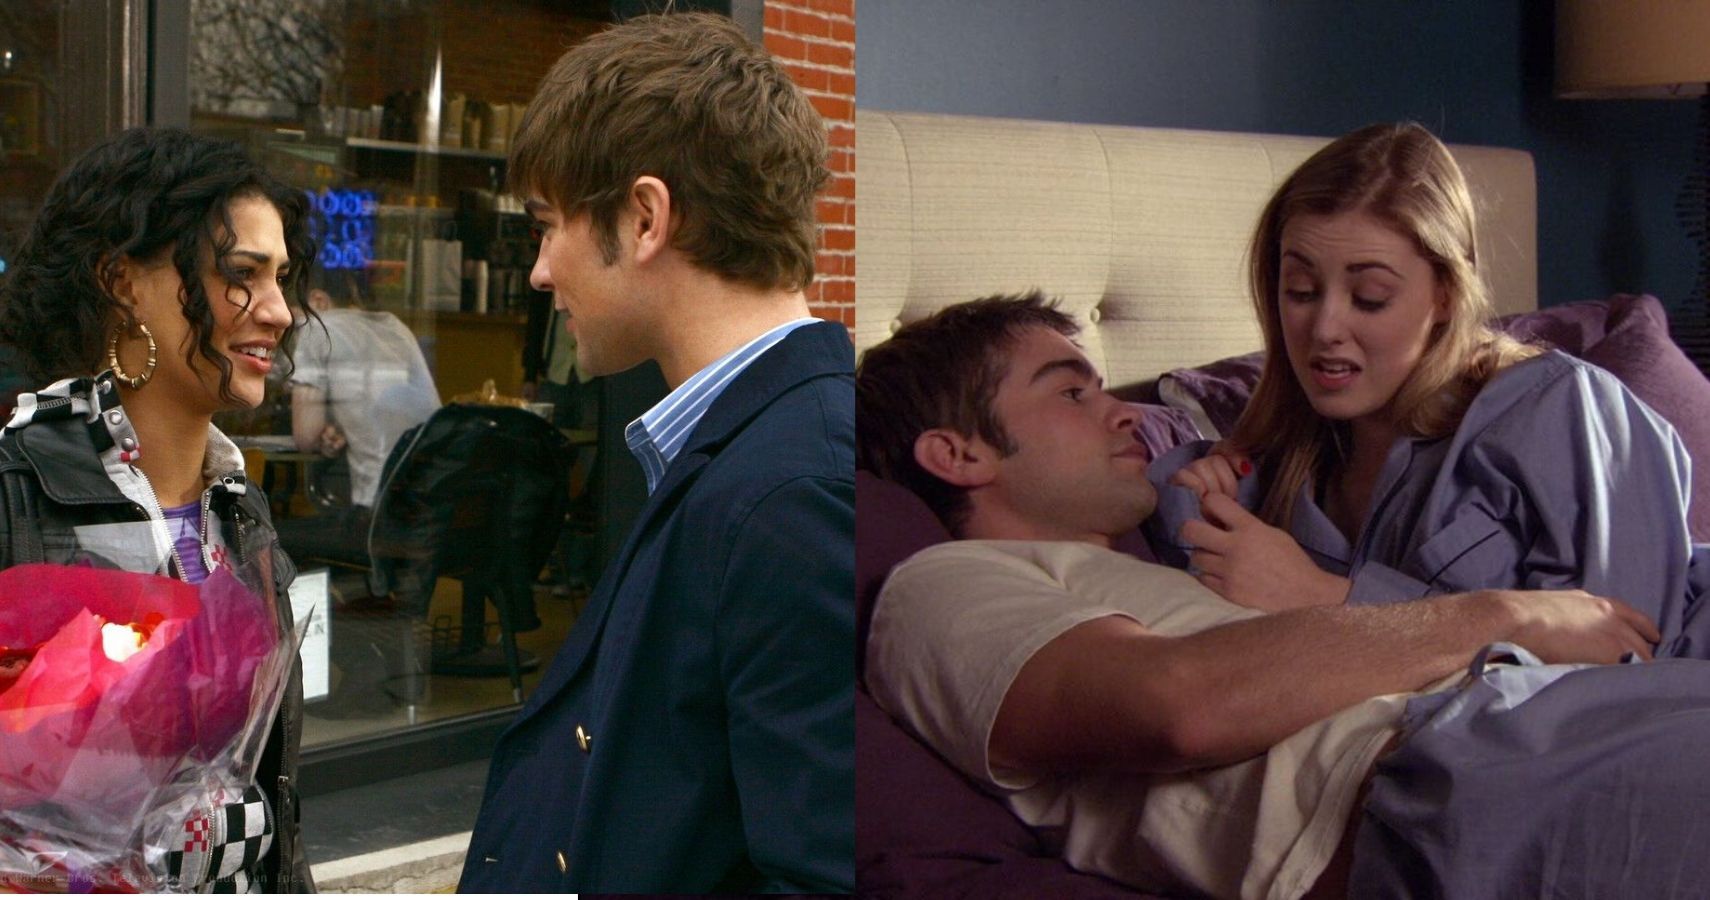 Gossip Girl 10 People Nate Could (Or Should) Have Ended Up With